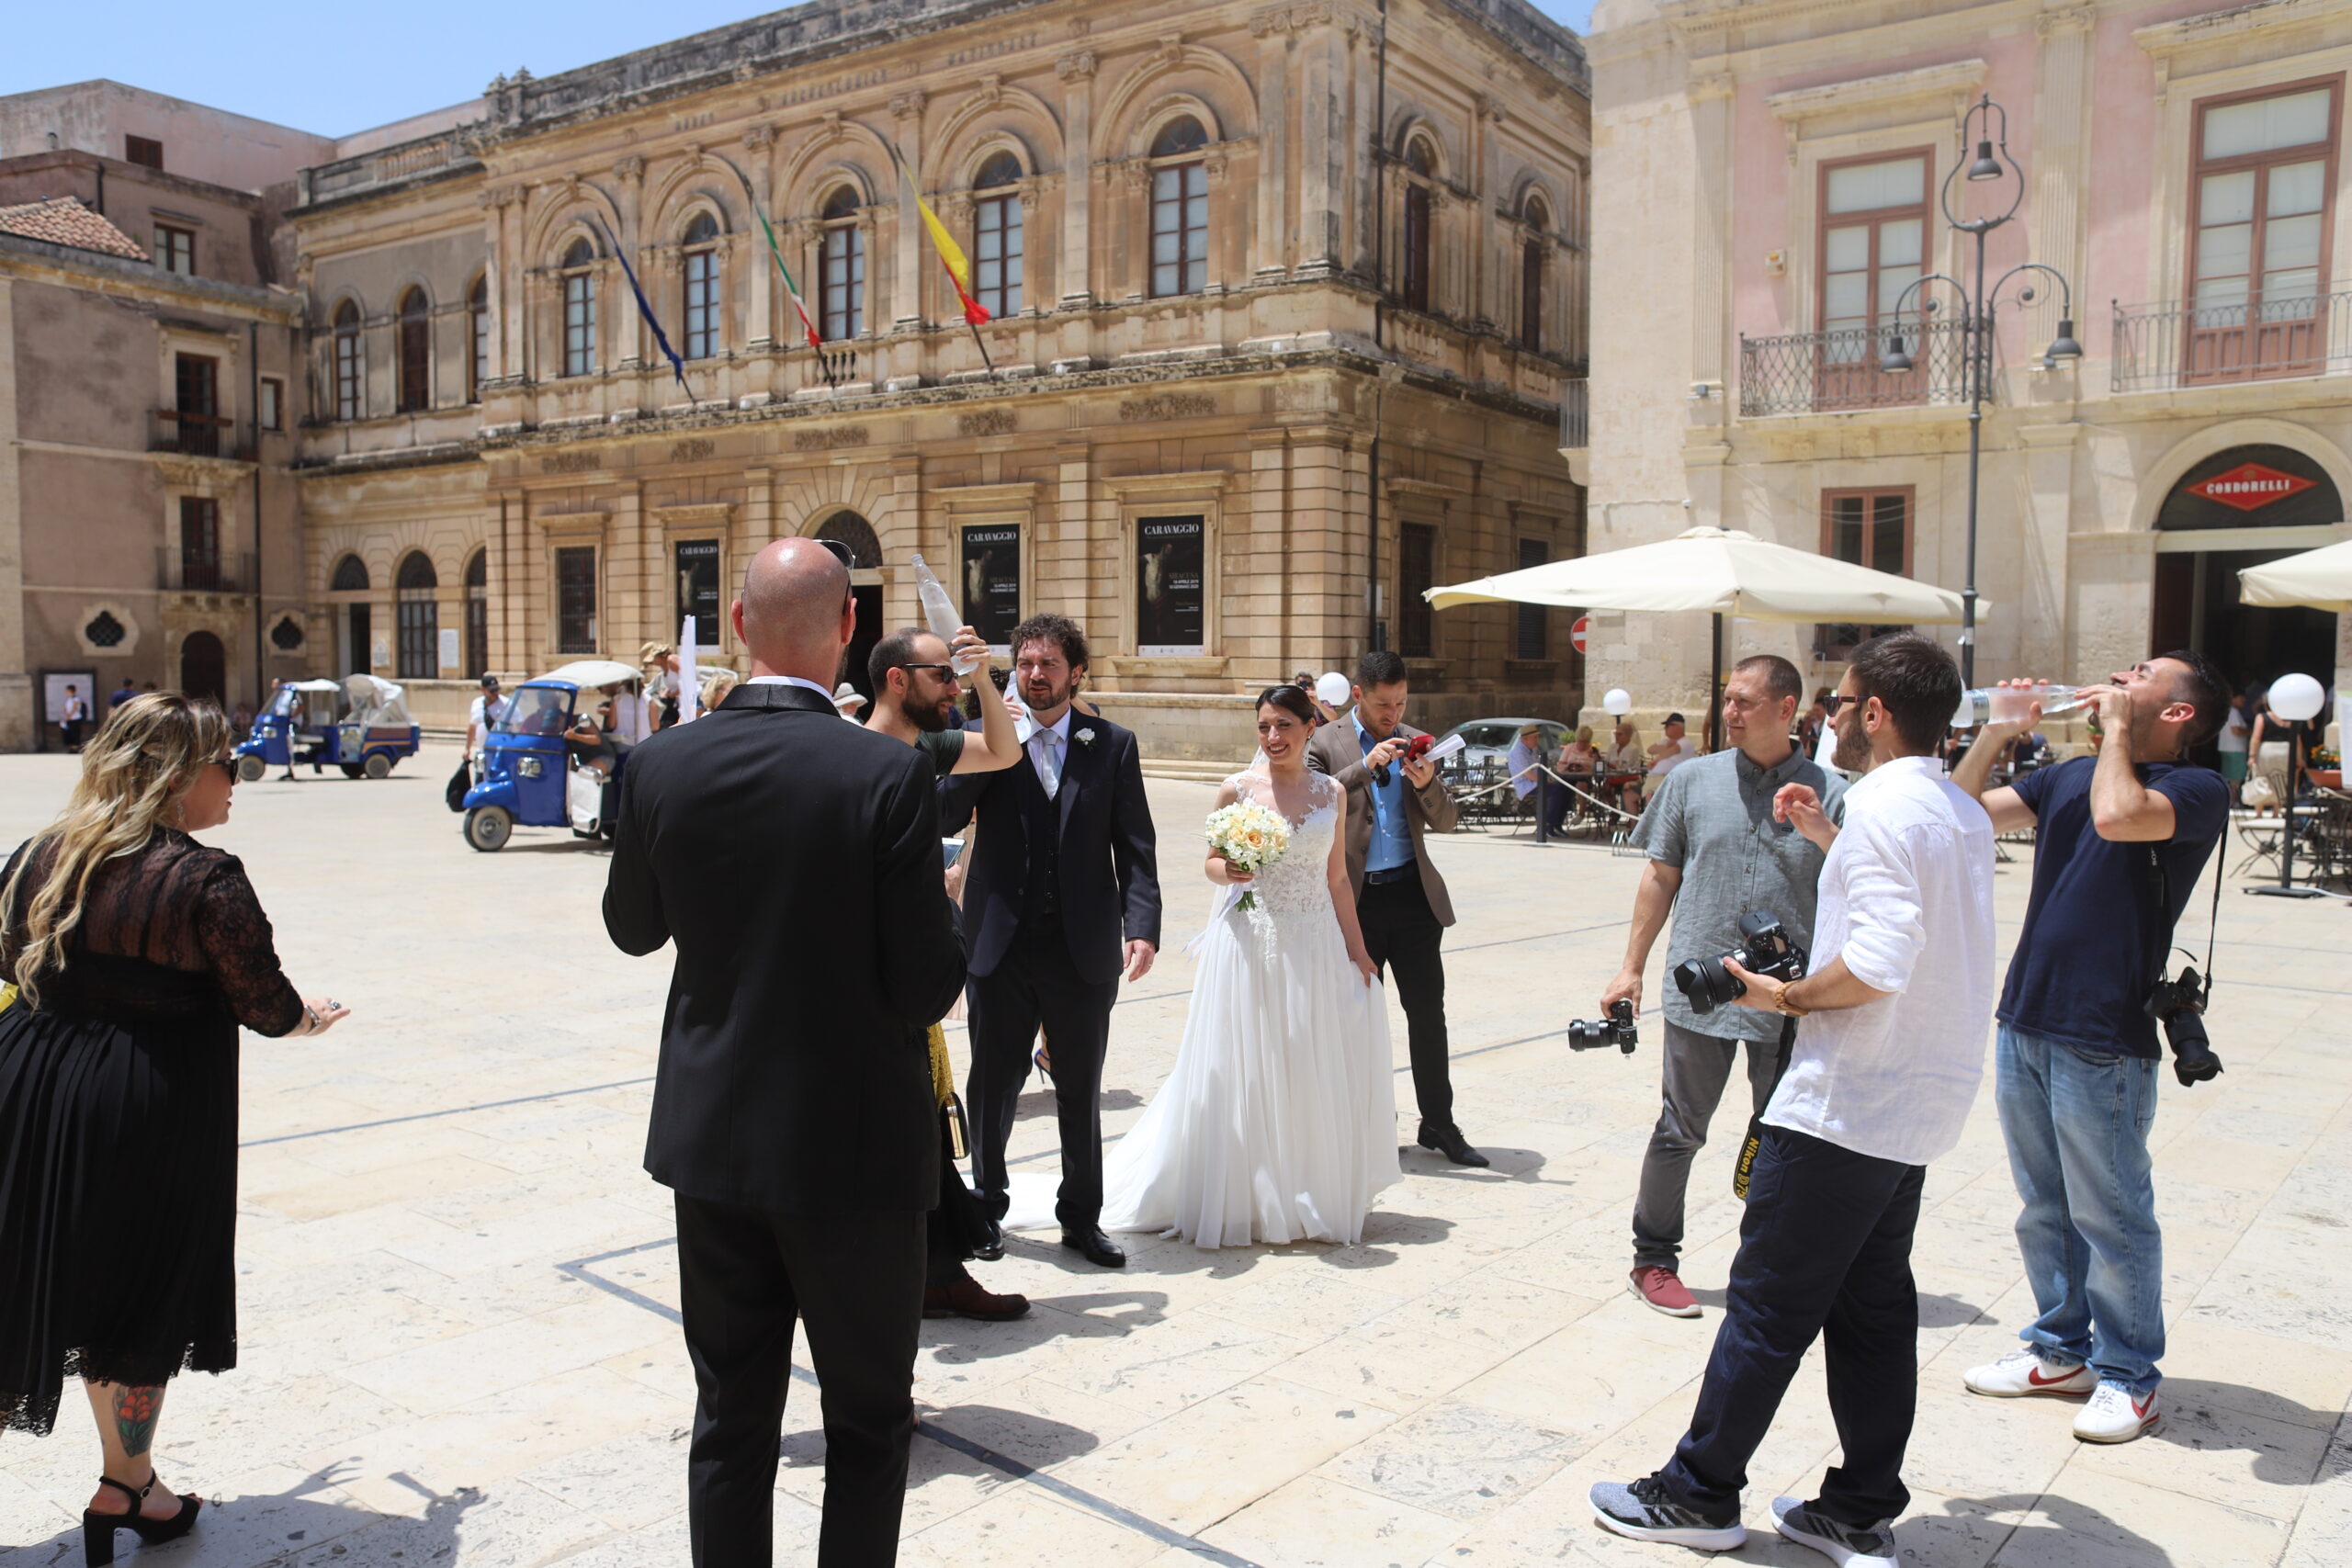 Challenges of Wedding Photography on a Hot Sunny Day